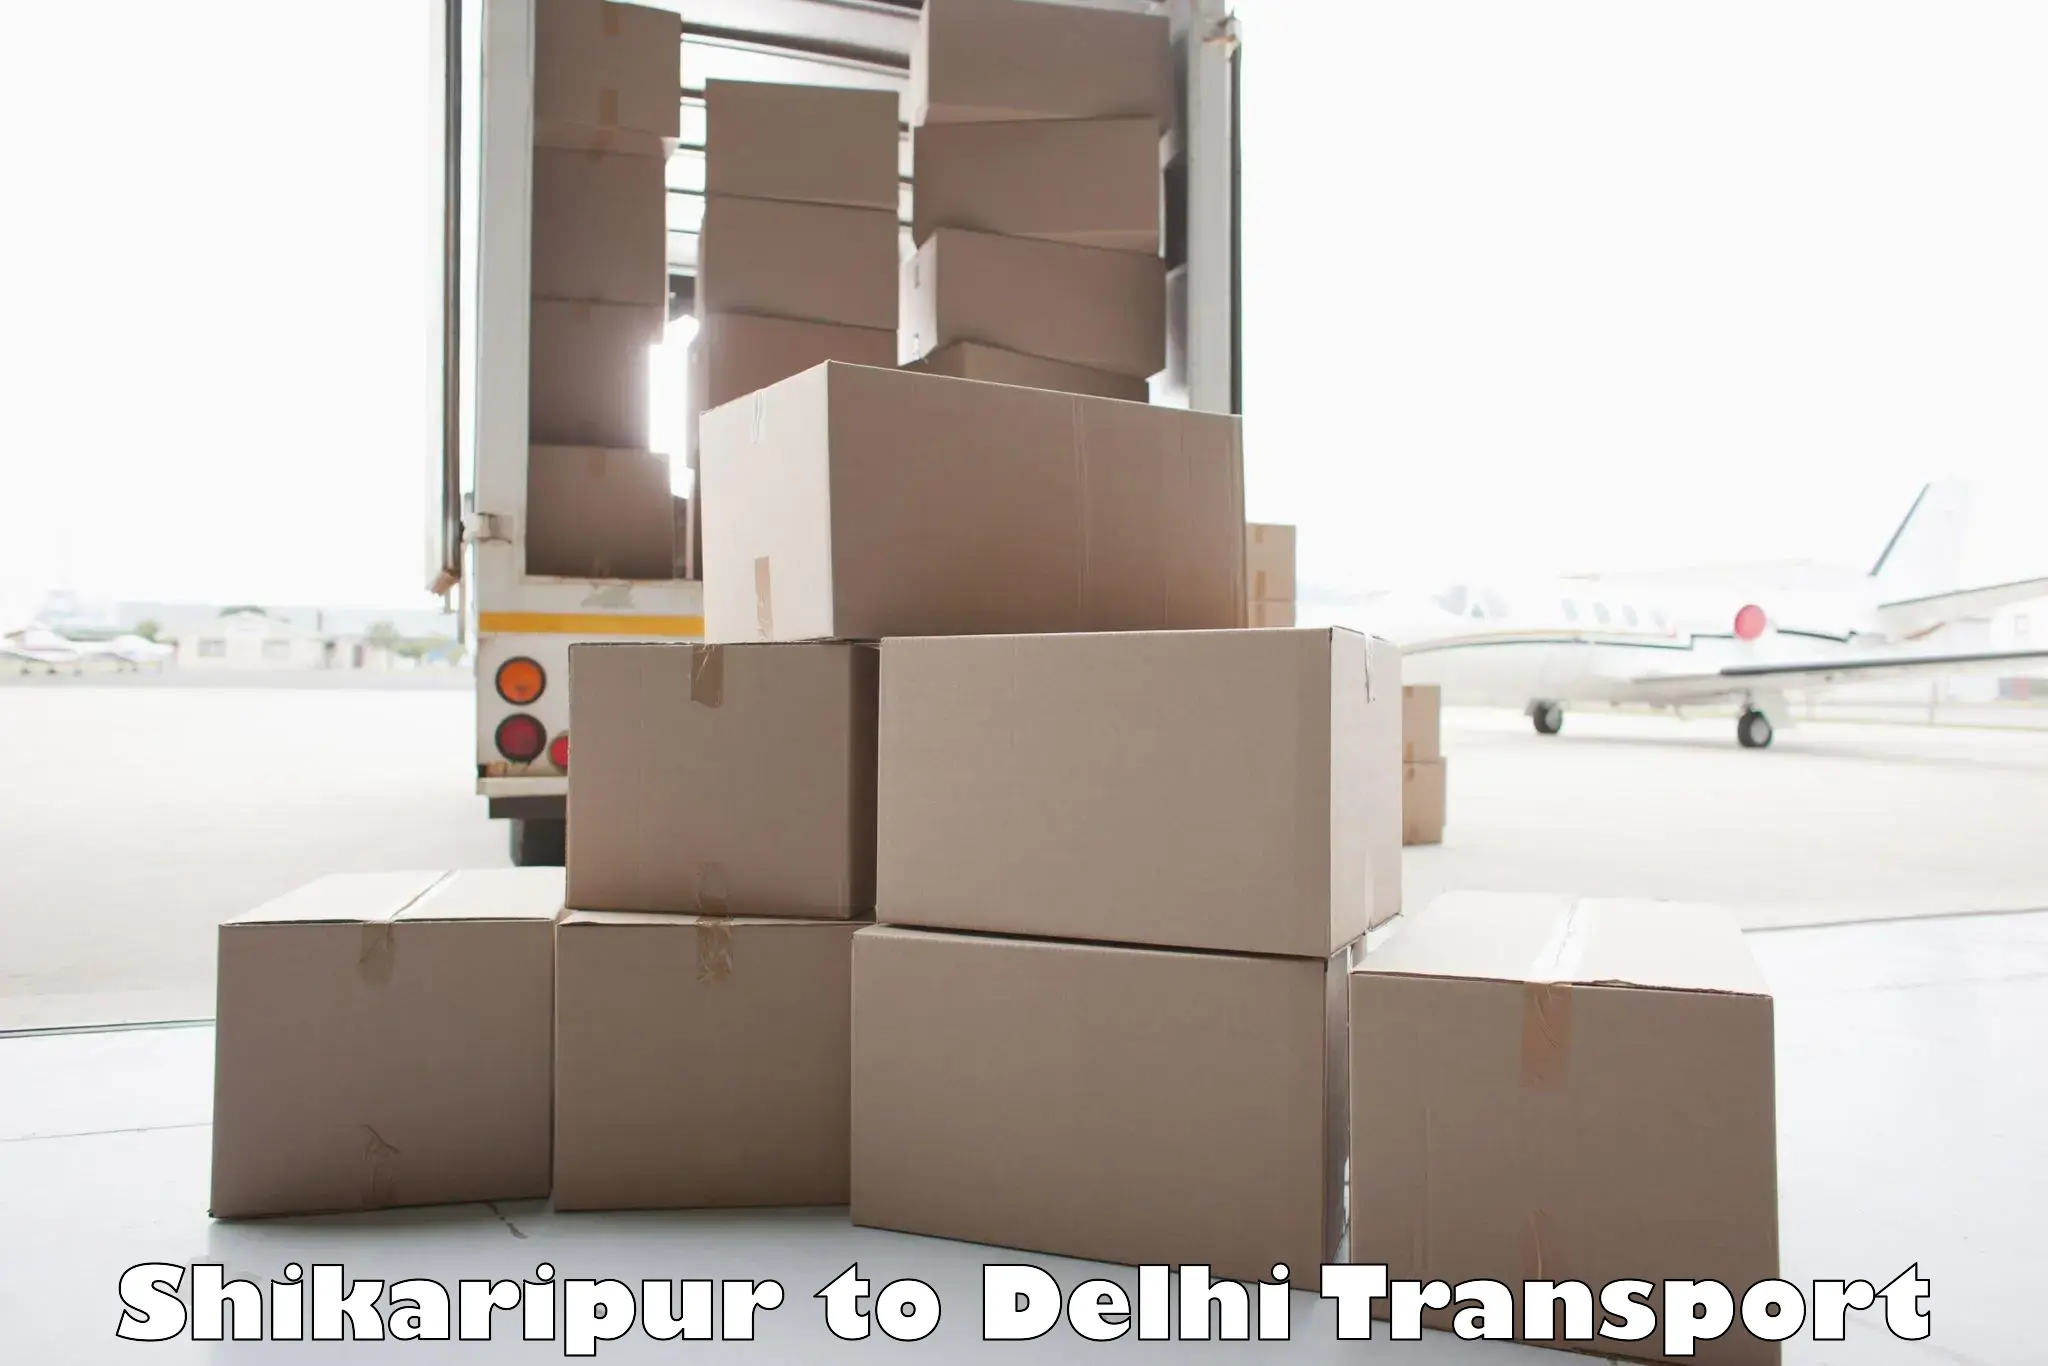 Daily parcel service transport Shikaripur to Lodhi Road